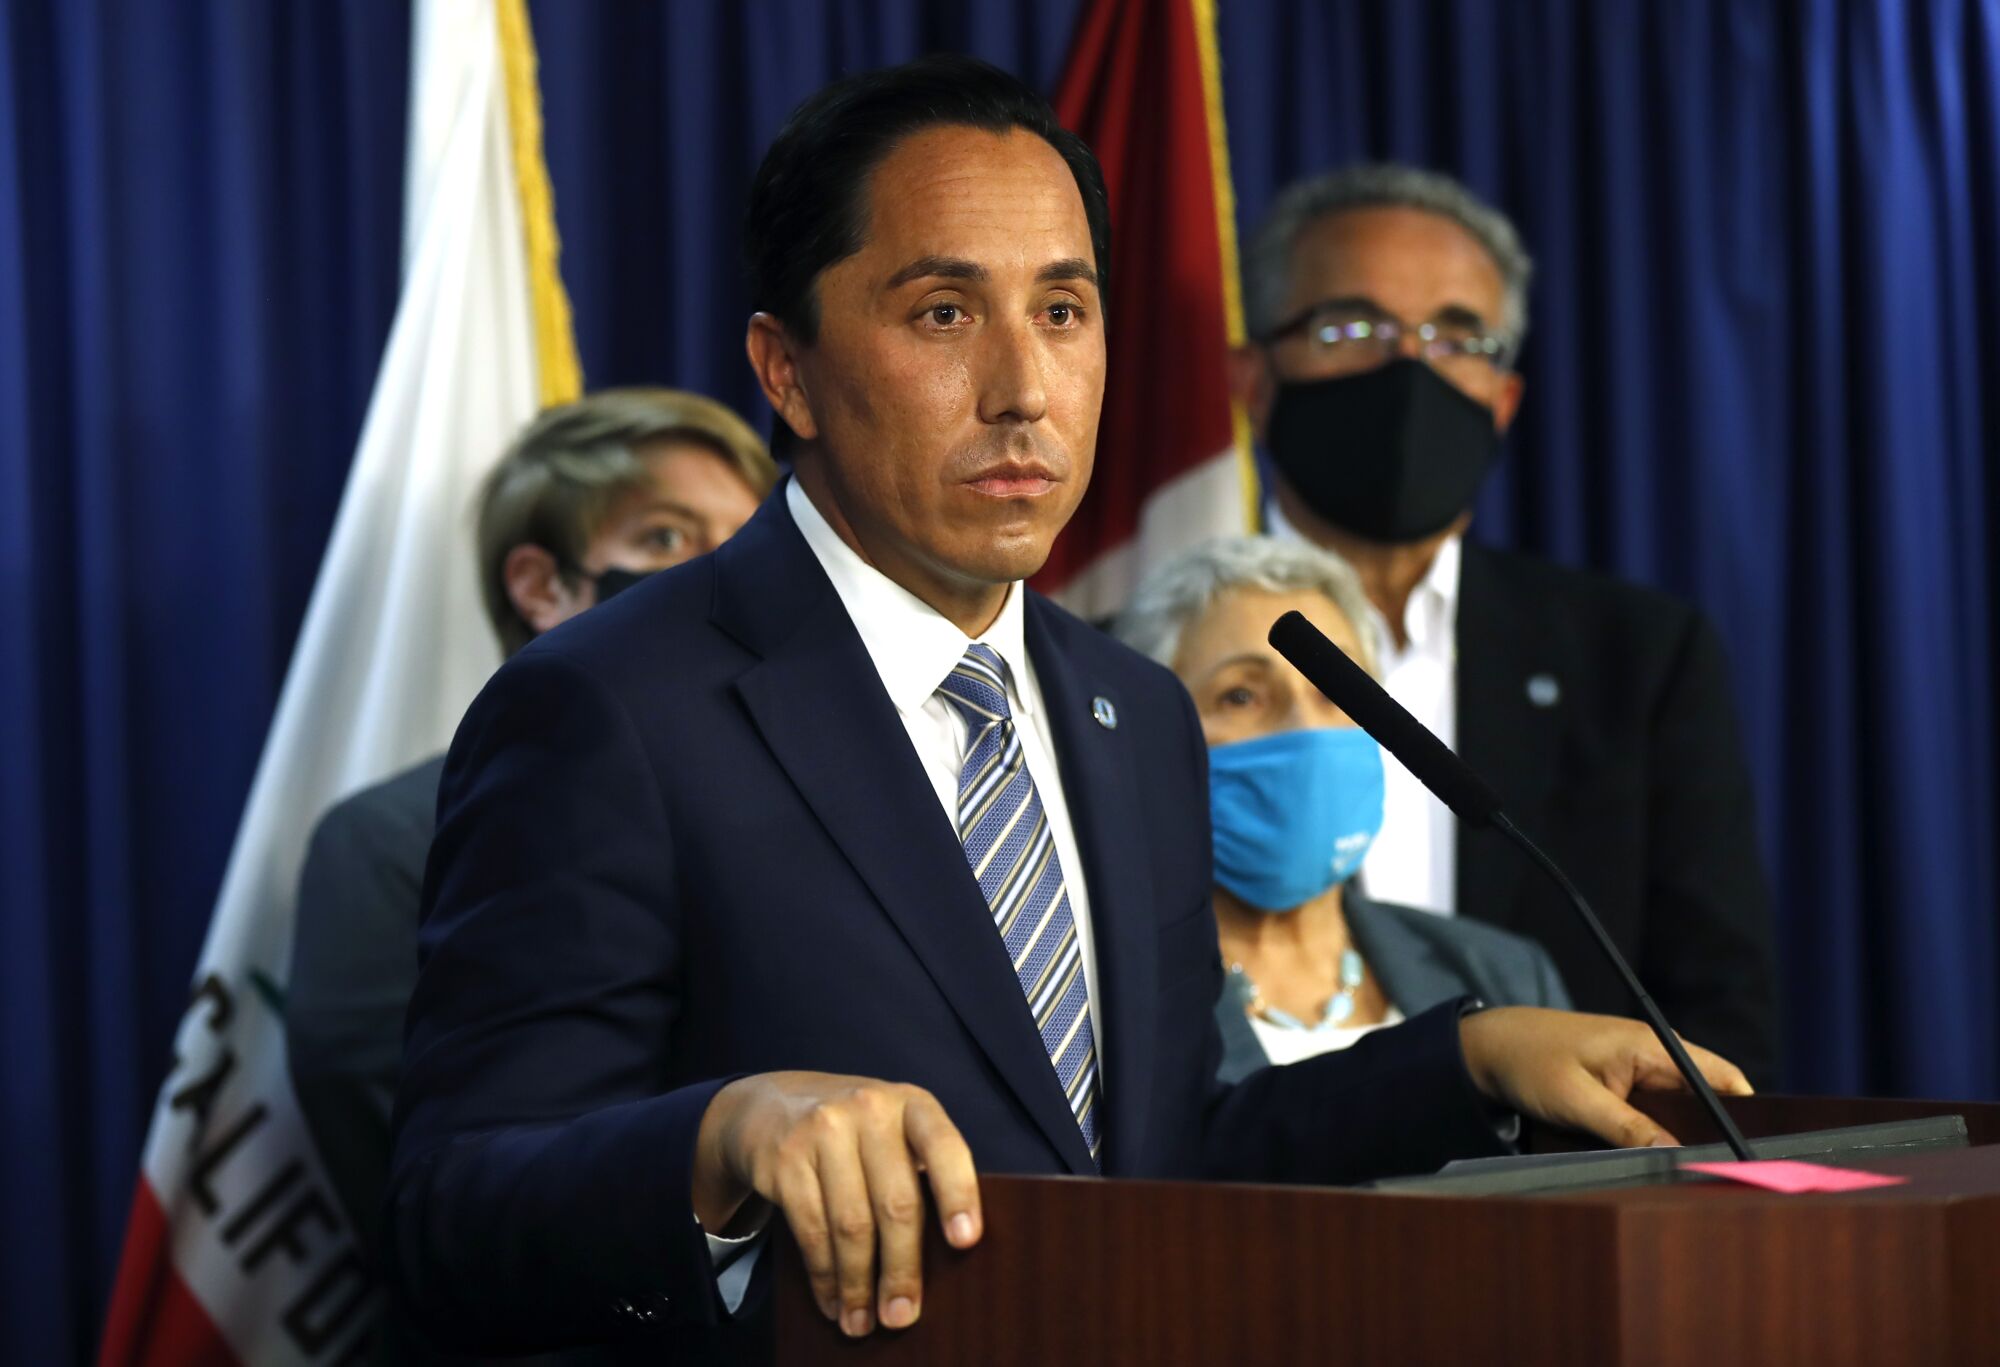 San Diego Mayor Todd Gloria, surrounded by city council members, at a news conference on Monday, Nov. 29, 2021.